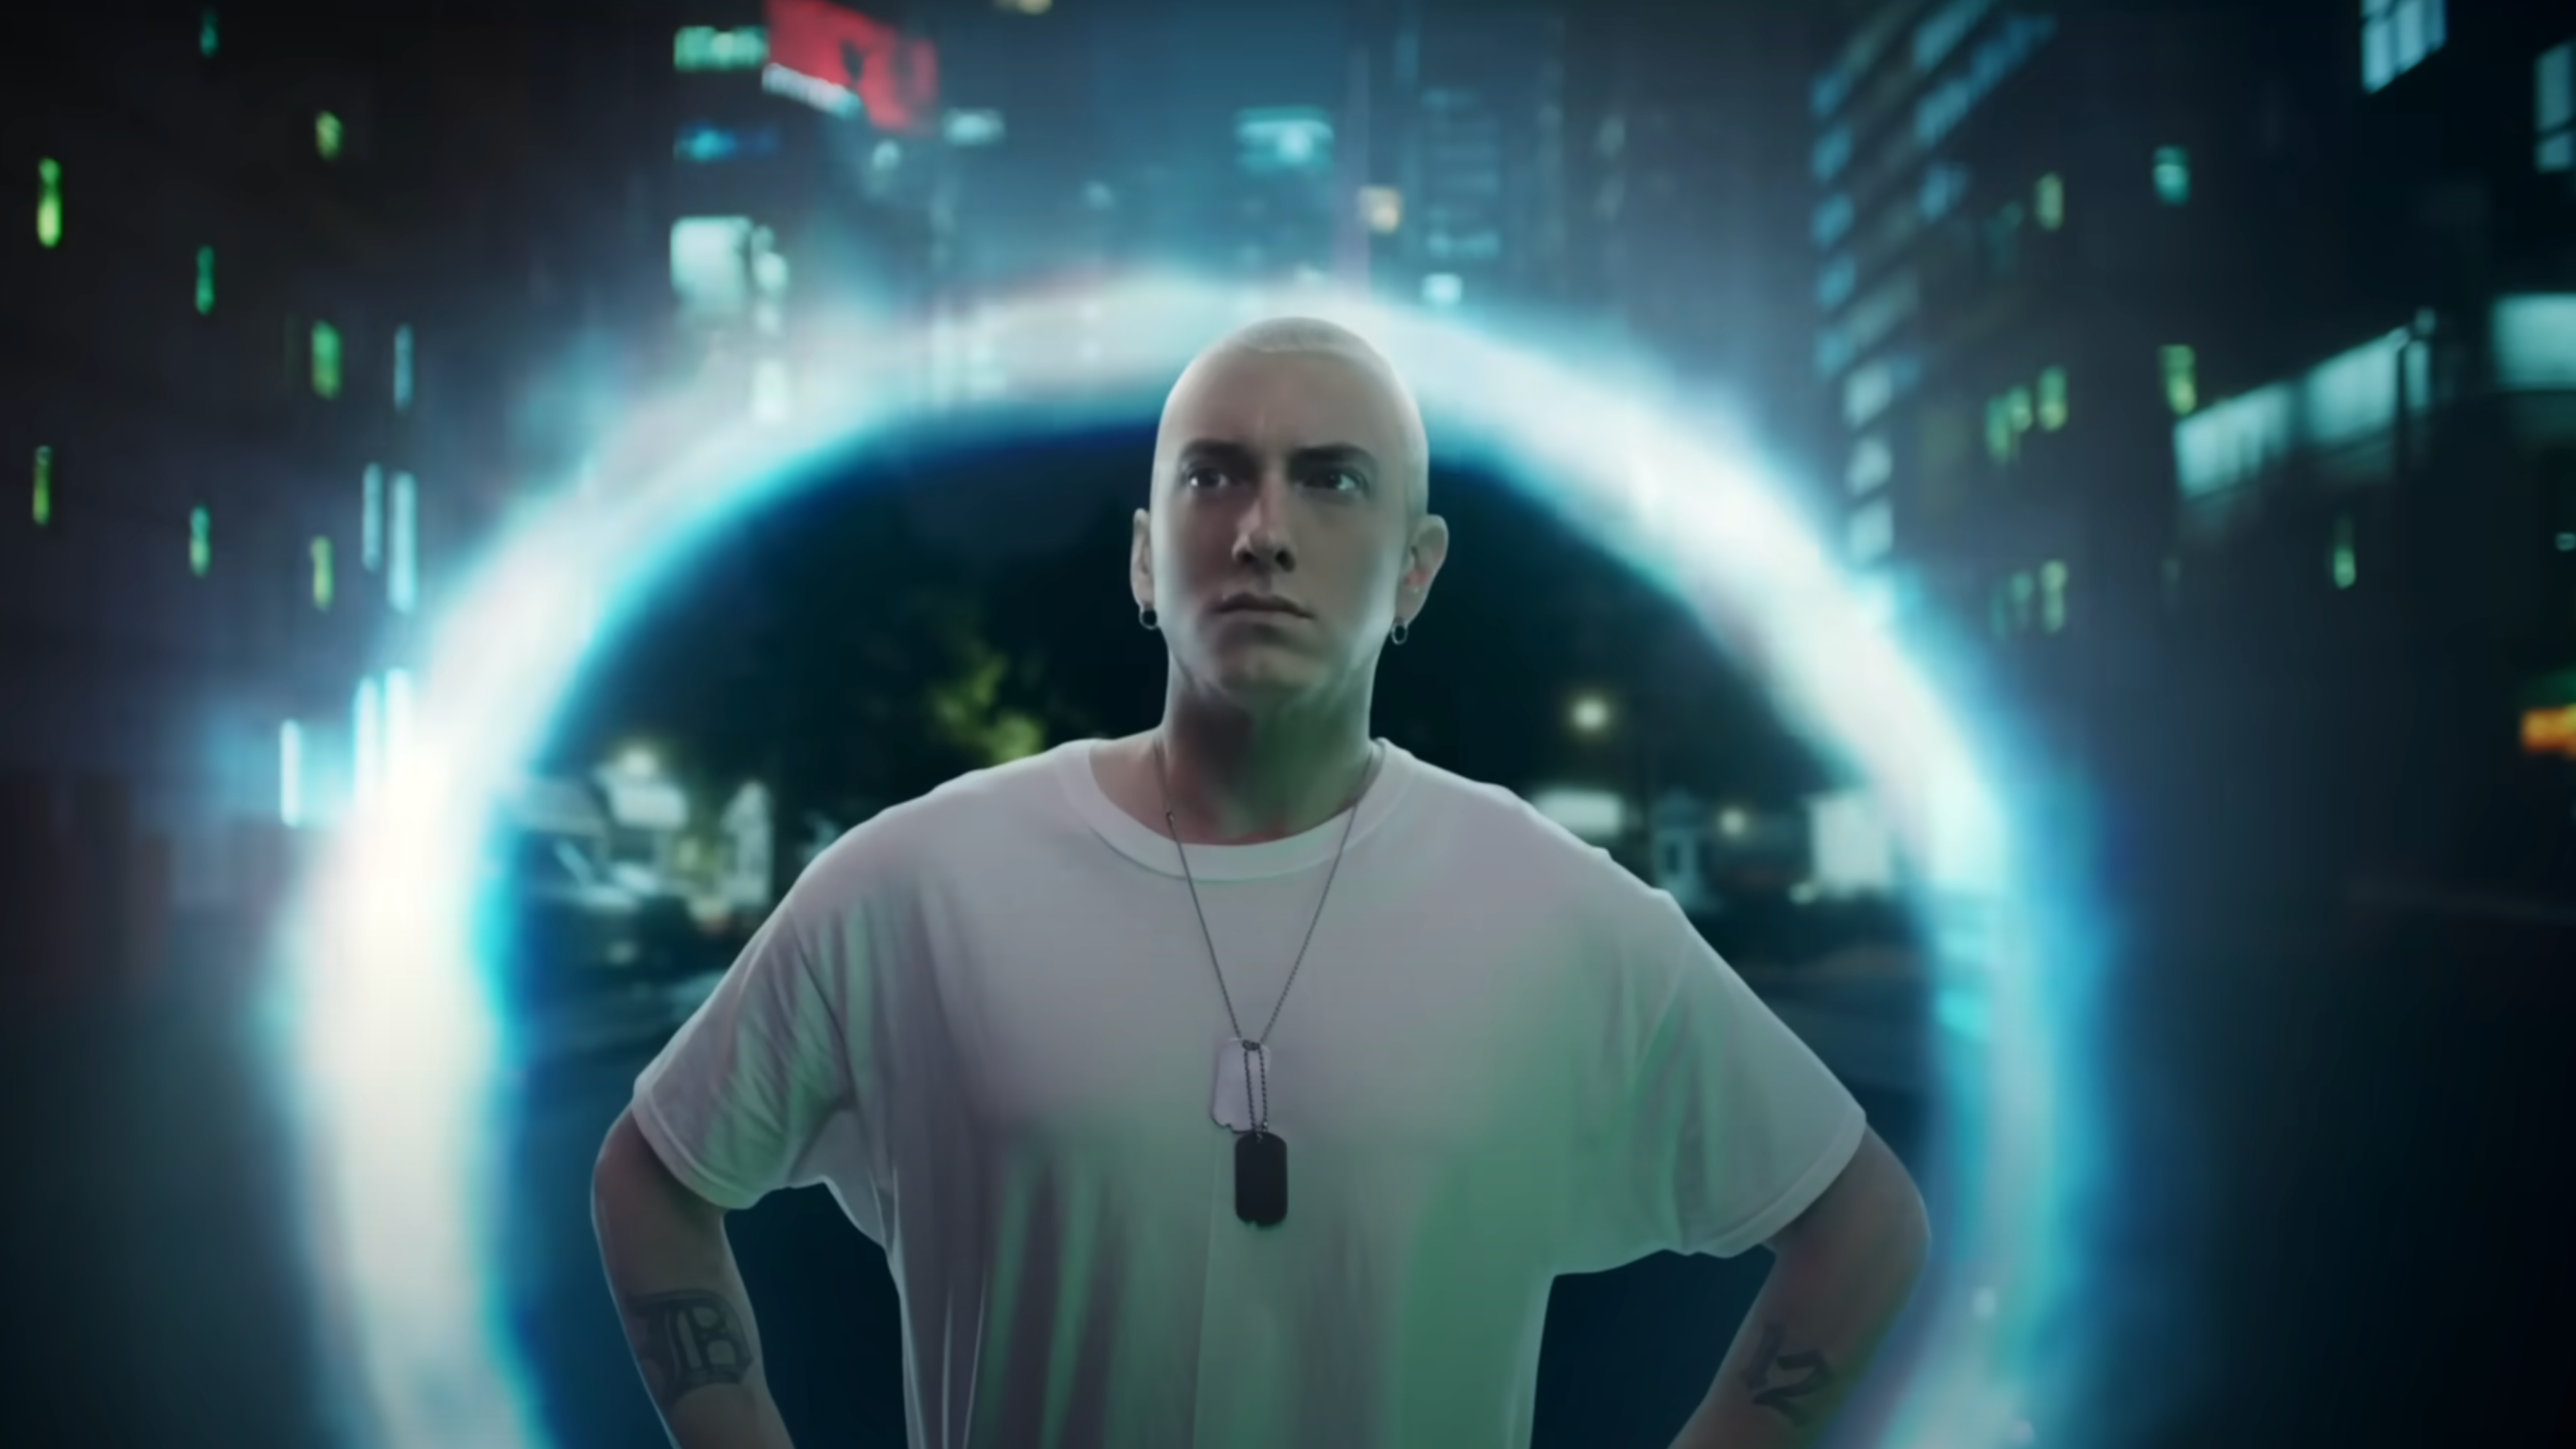 Eminem takes shots at Megan Thee Stallion, woke culture, and more in “Houdini” video